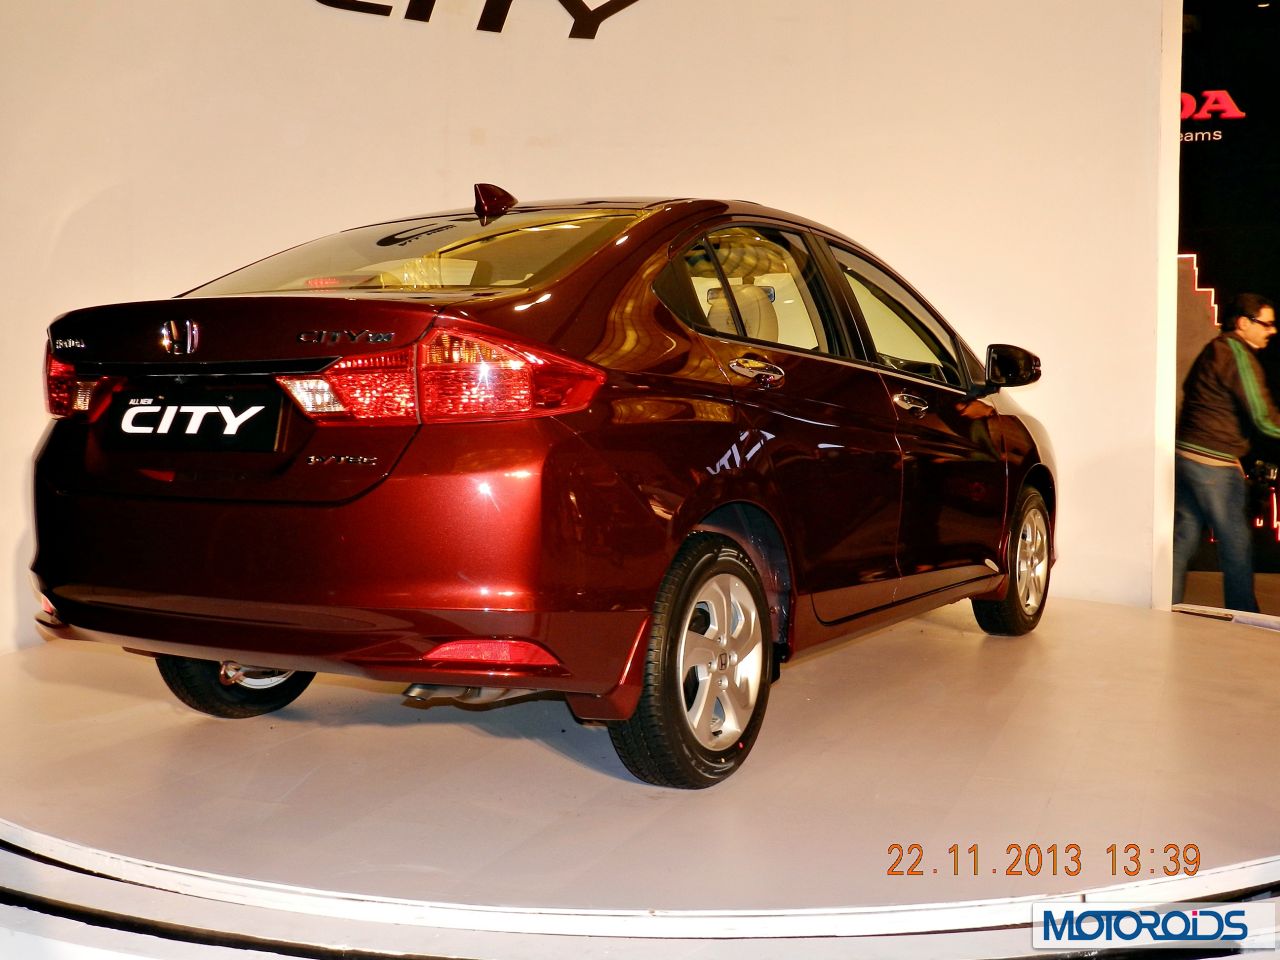 New honda city launch date in india #4